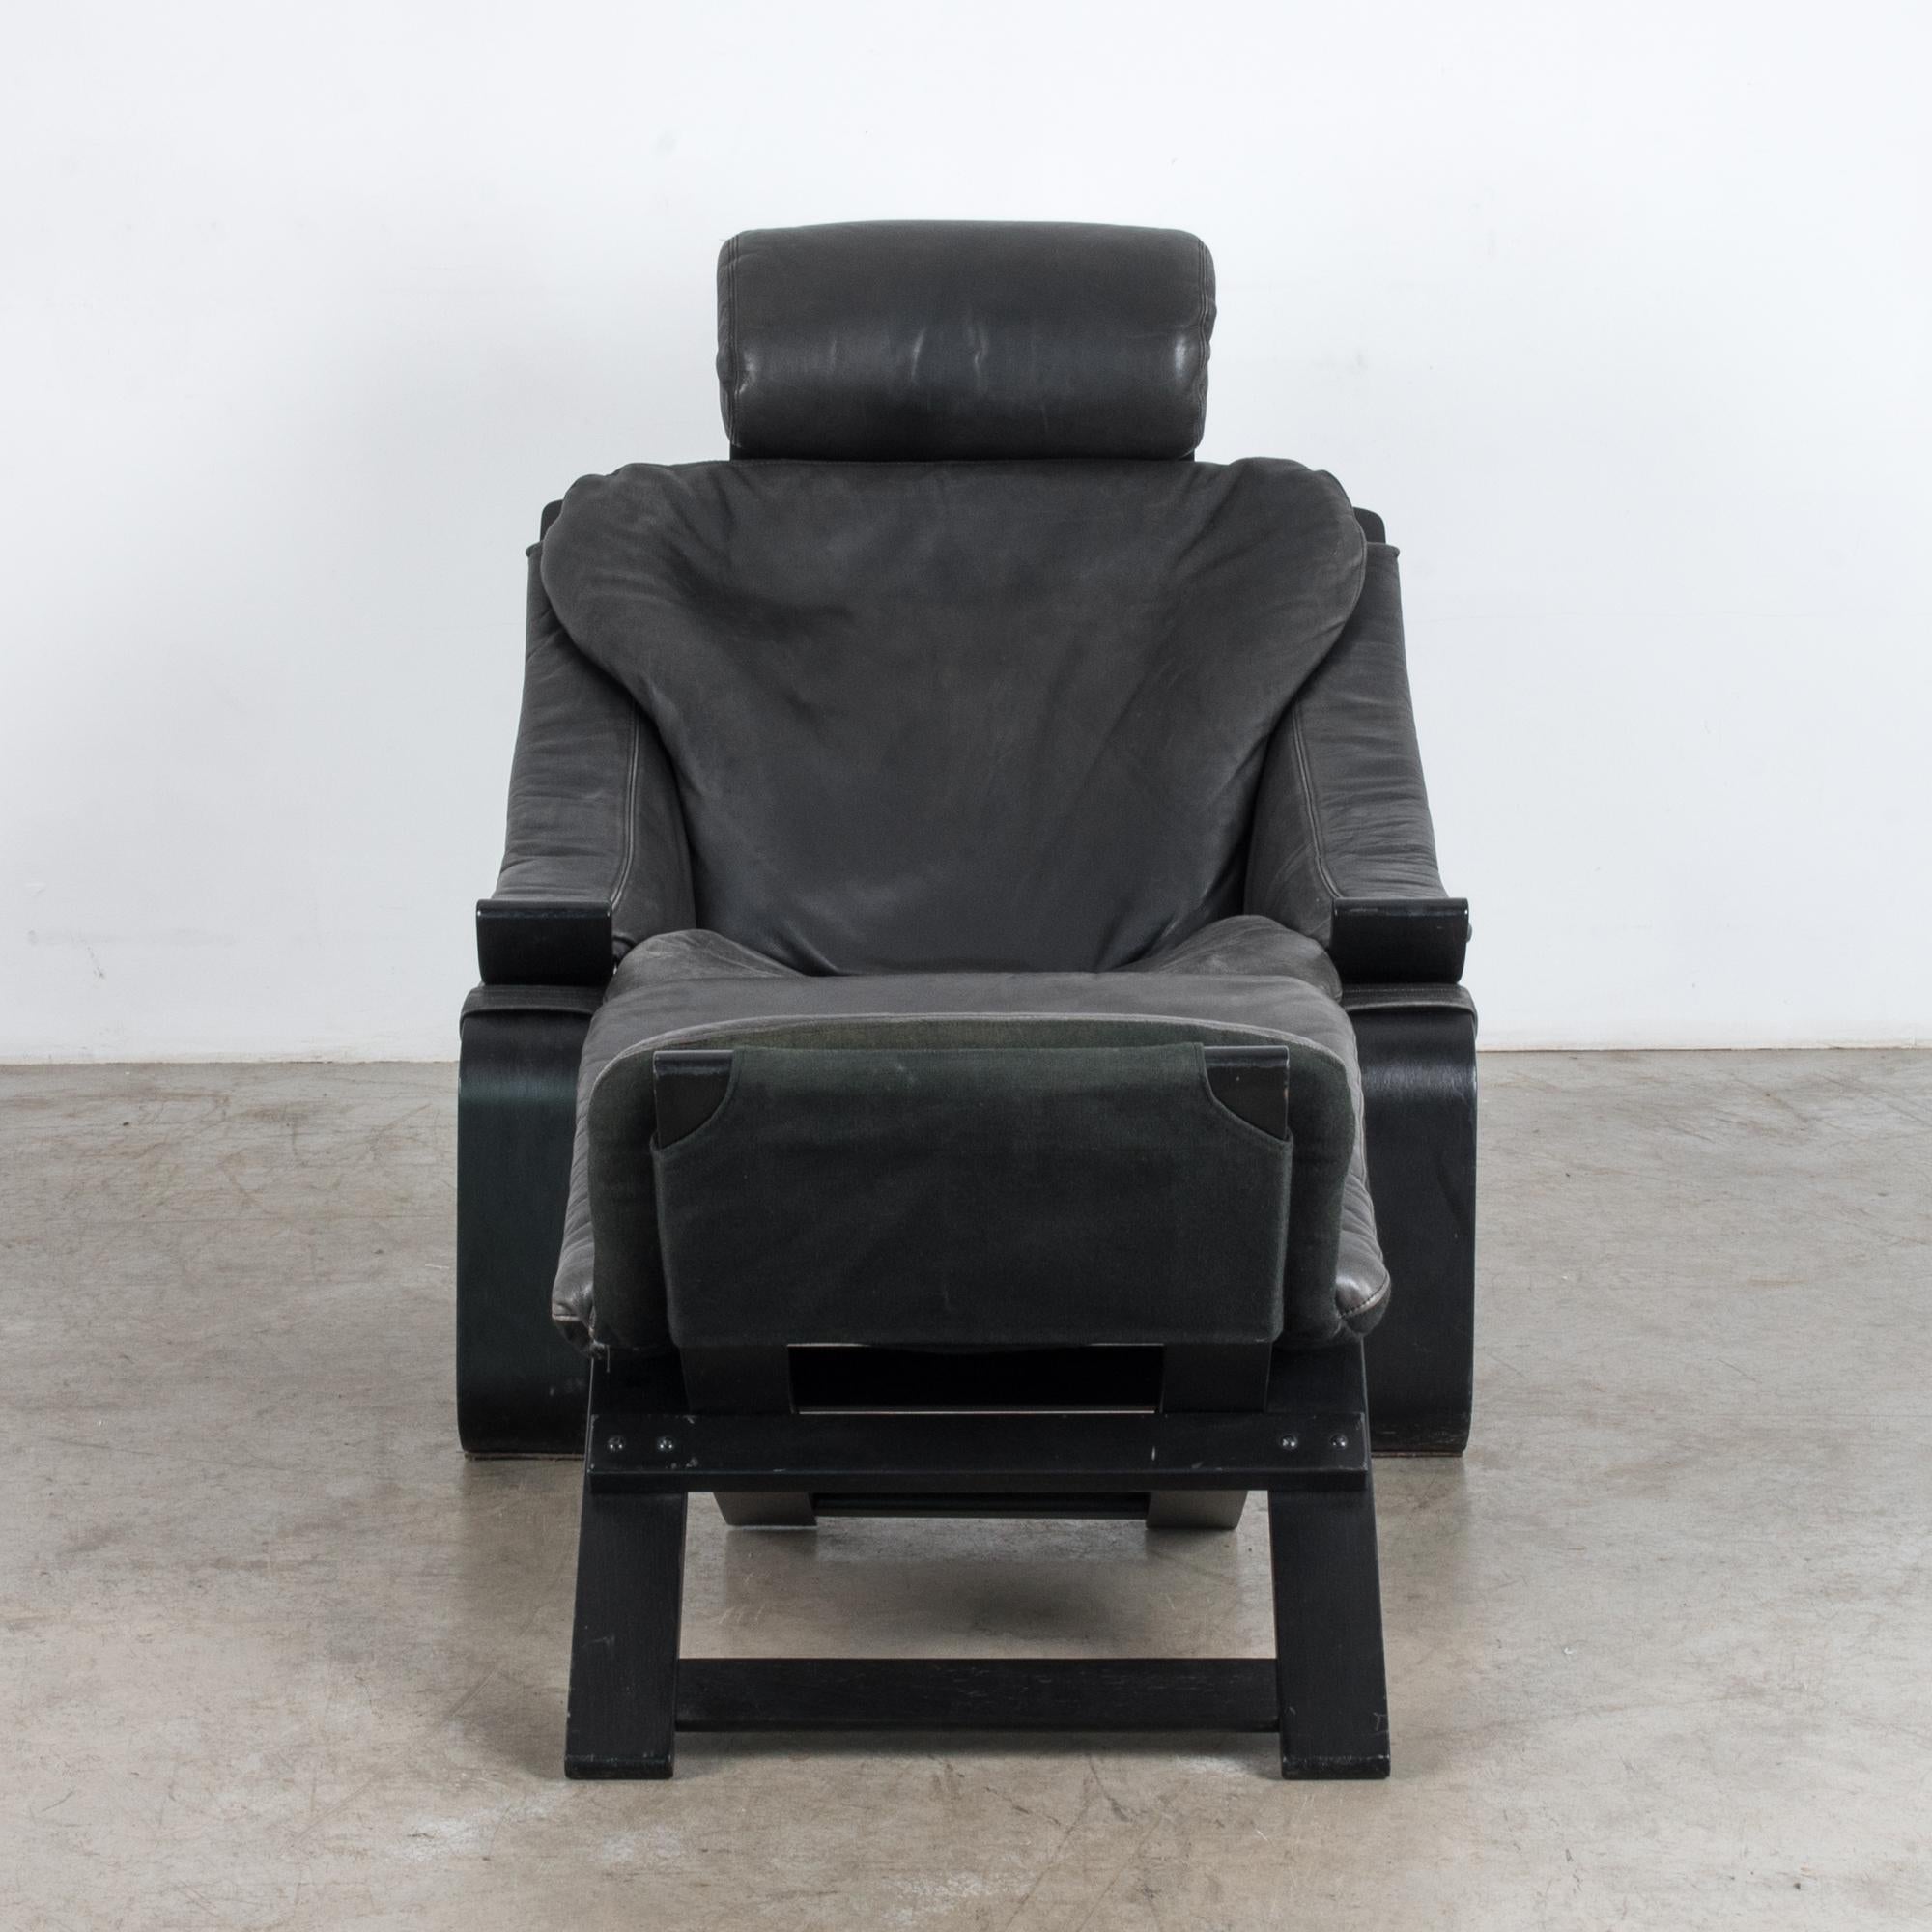 A black leather Kroken armchair from Sweden, circa 1970, with accompanying ottoman. A cantilevered black frame supports a seat of black leather. The deep hollow of the seat, low curves of the armrests and reclined shape conspire to invite a position